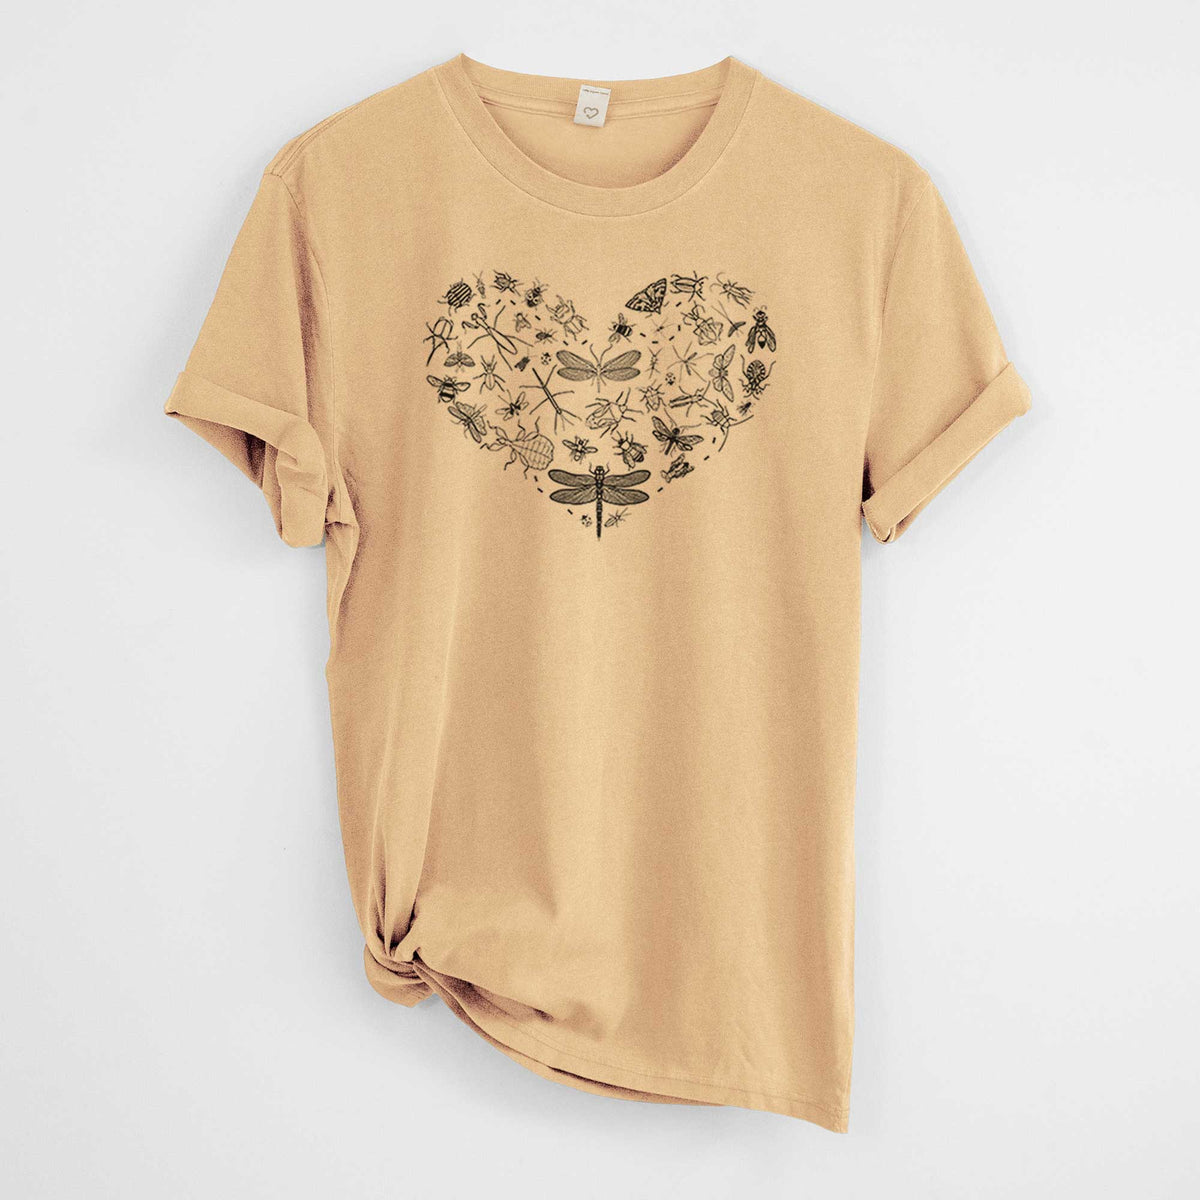 Heart Full of Insects -  Mineral Wash 100% Organic Cotton Short Sleeve